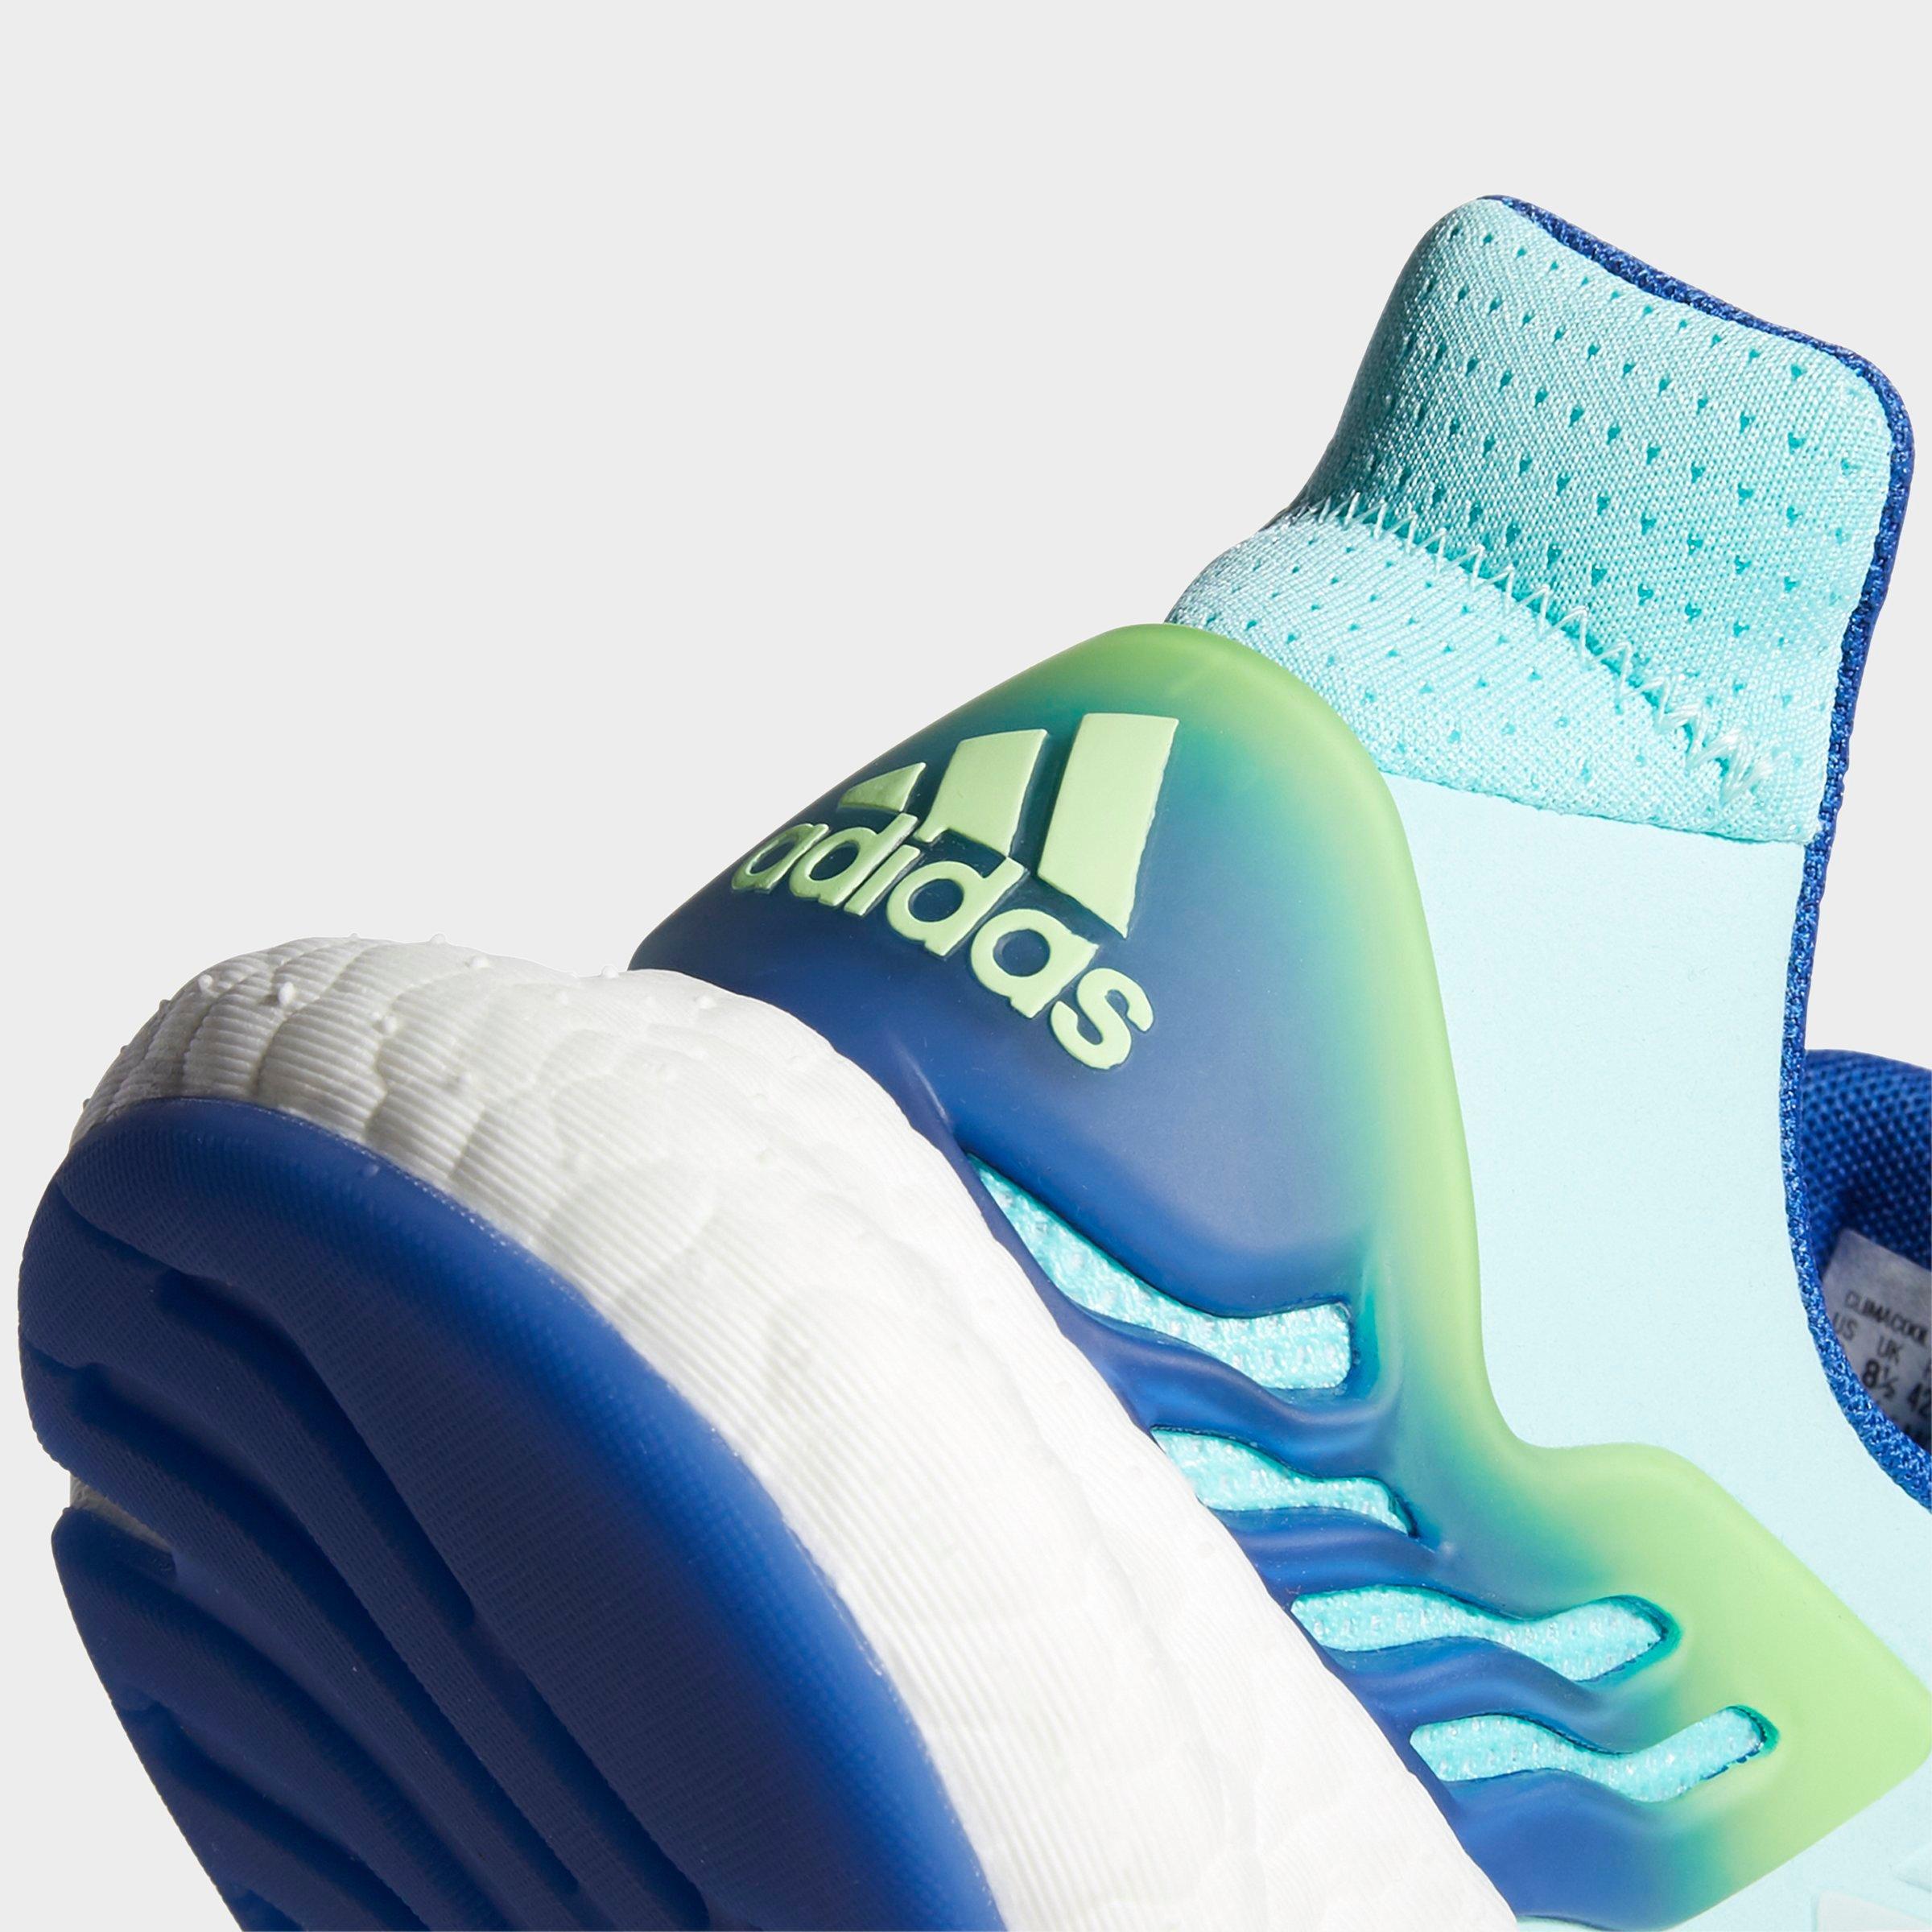 adidas cool running shoes